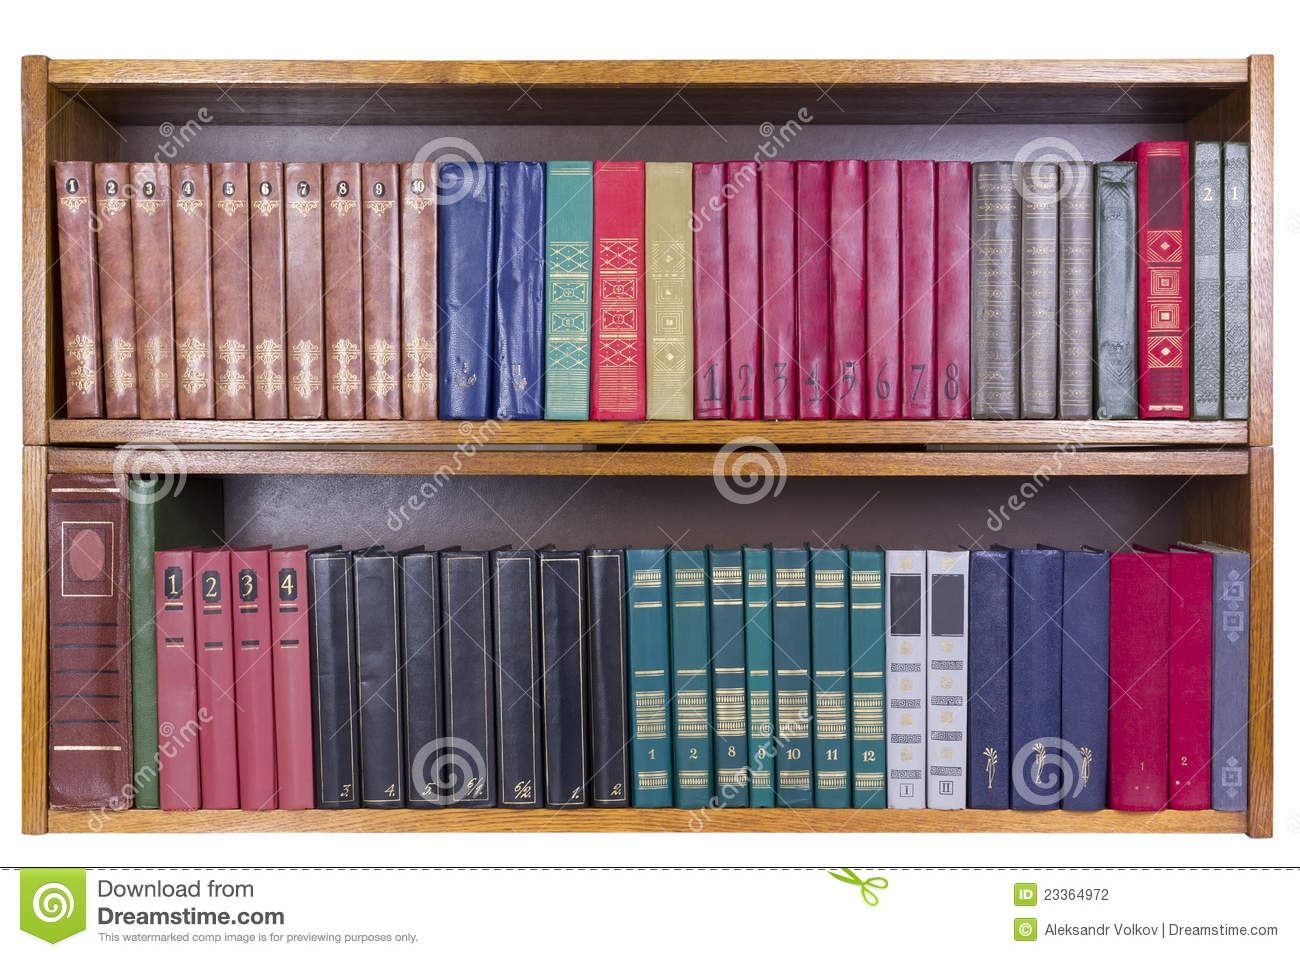 Old Retro Books With Color Covers On A Wooden Shelf Front View  Mass